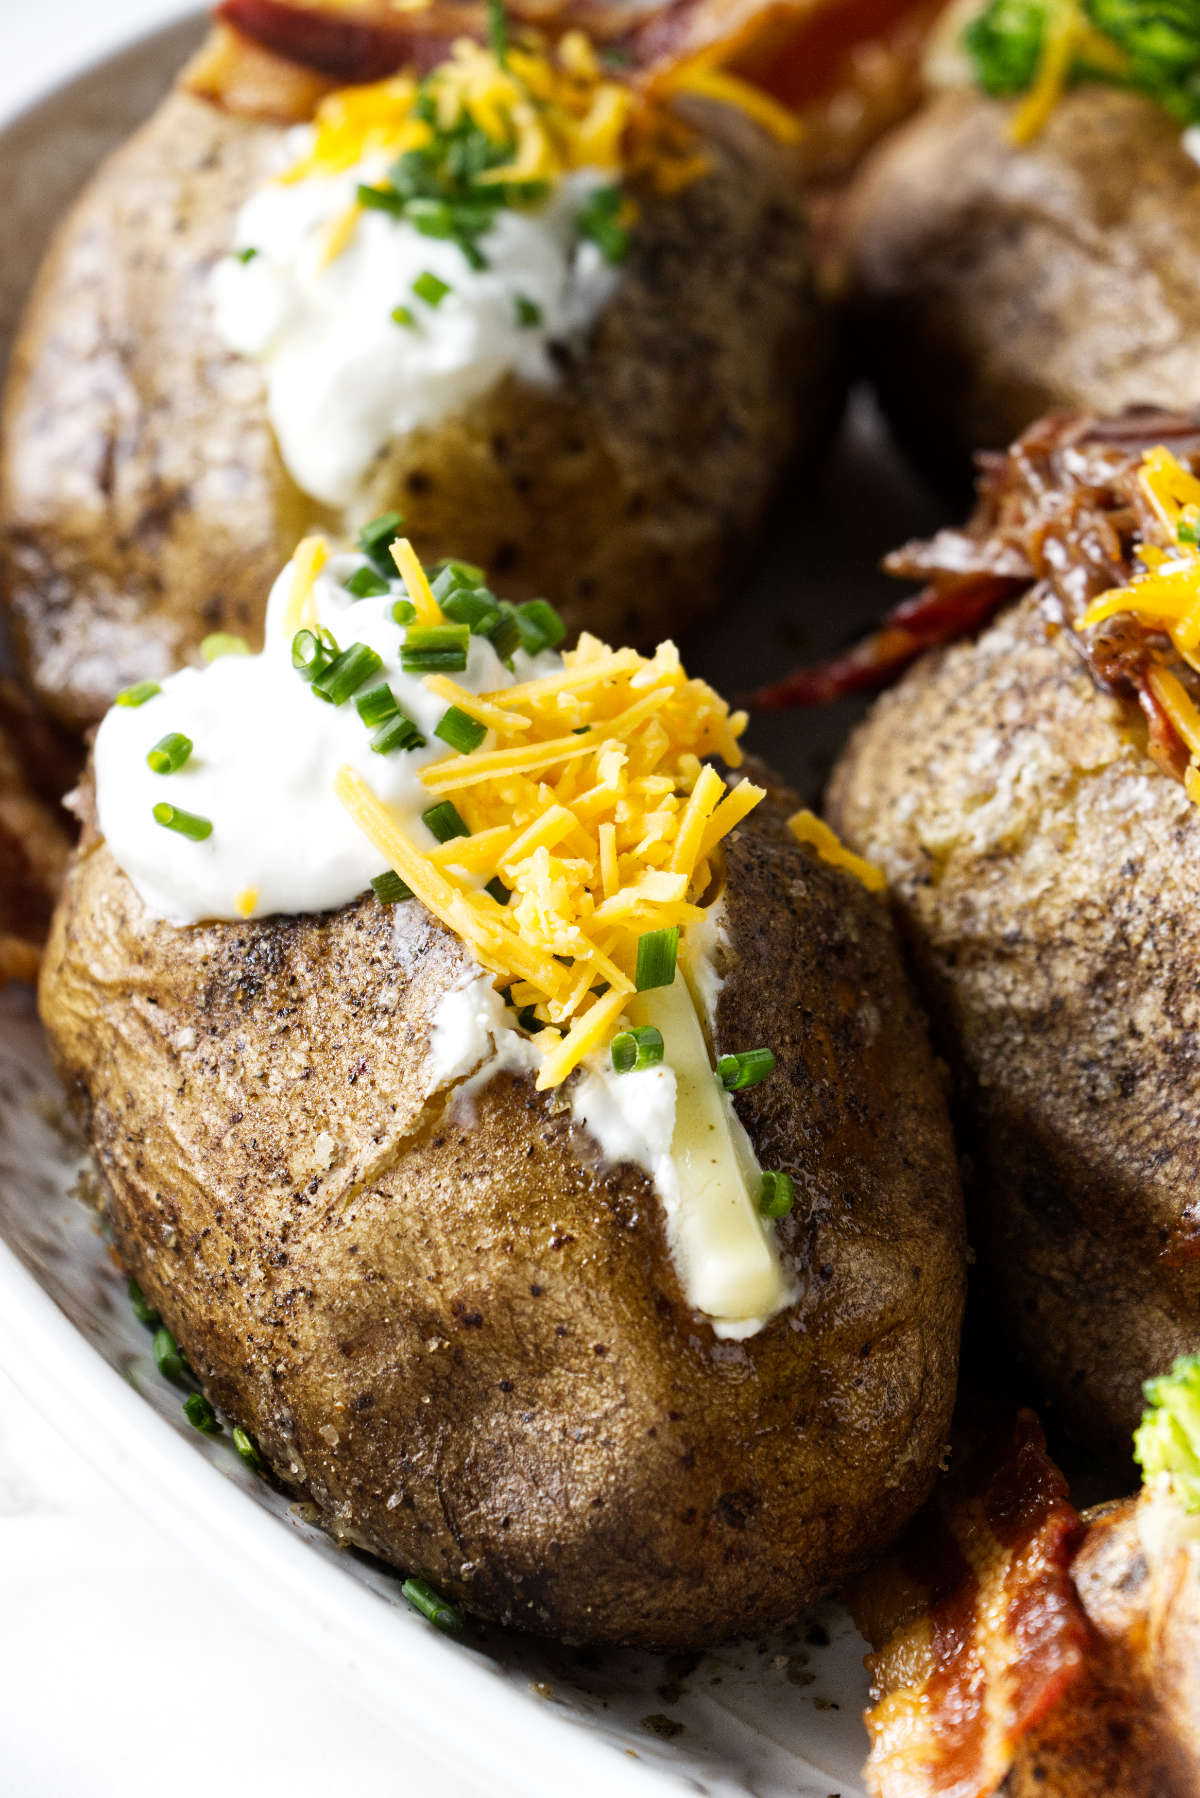 Traeger Smoked Baked Potatoes - Savor the Best